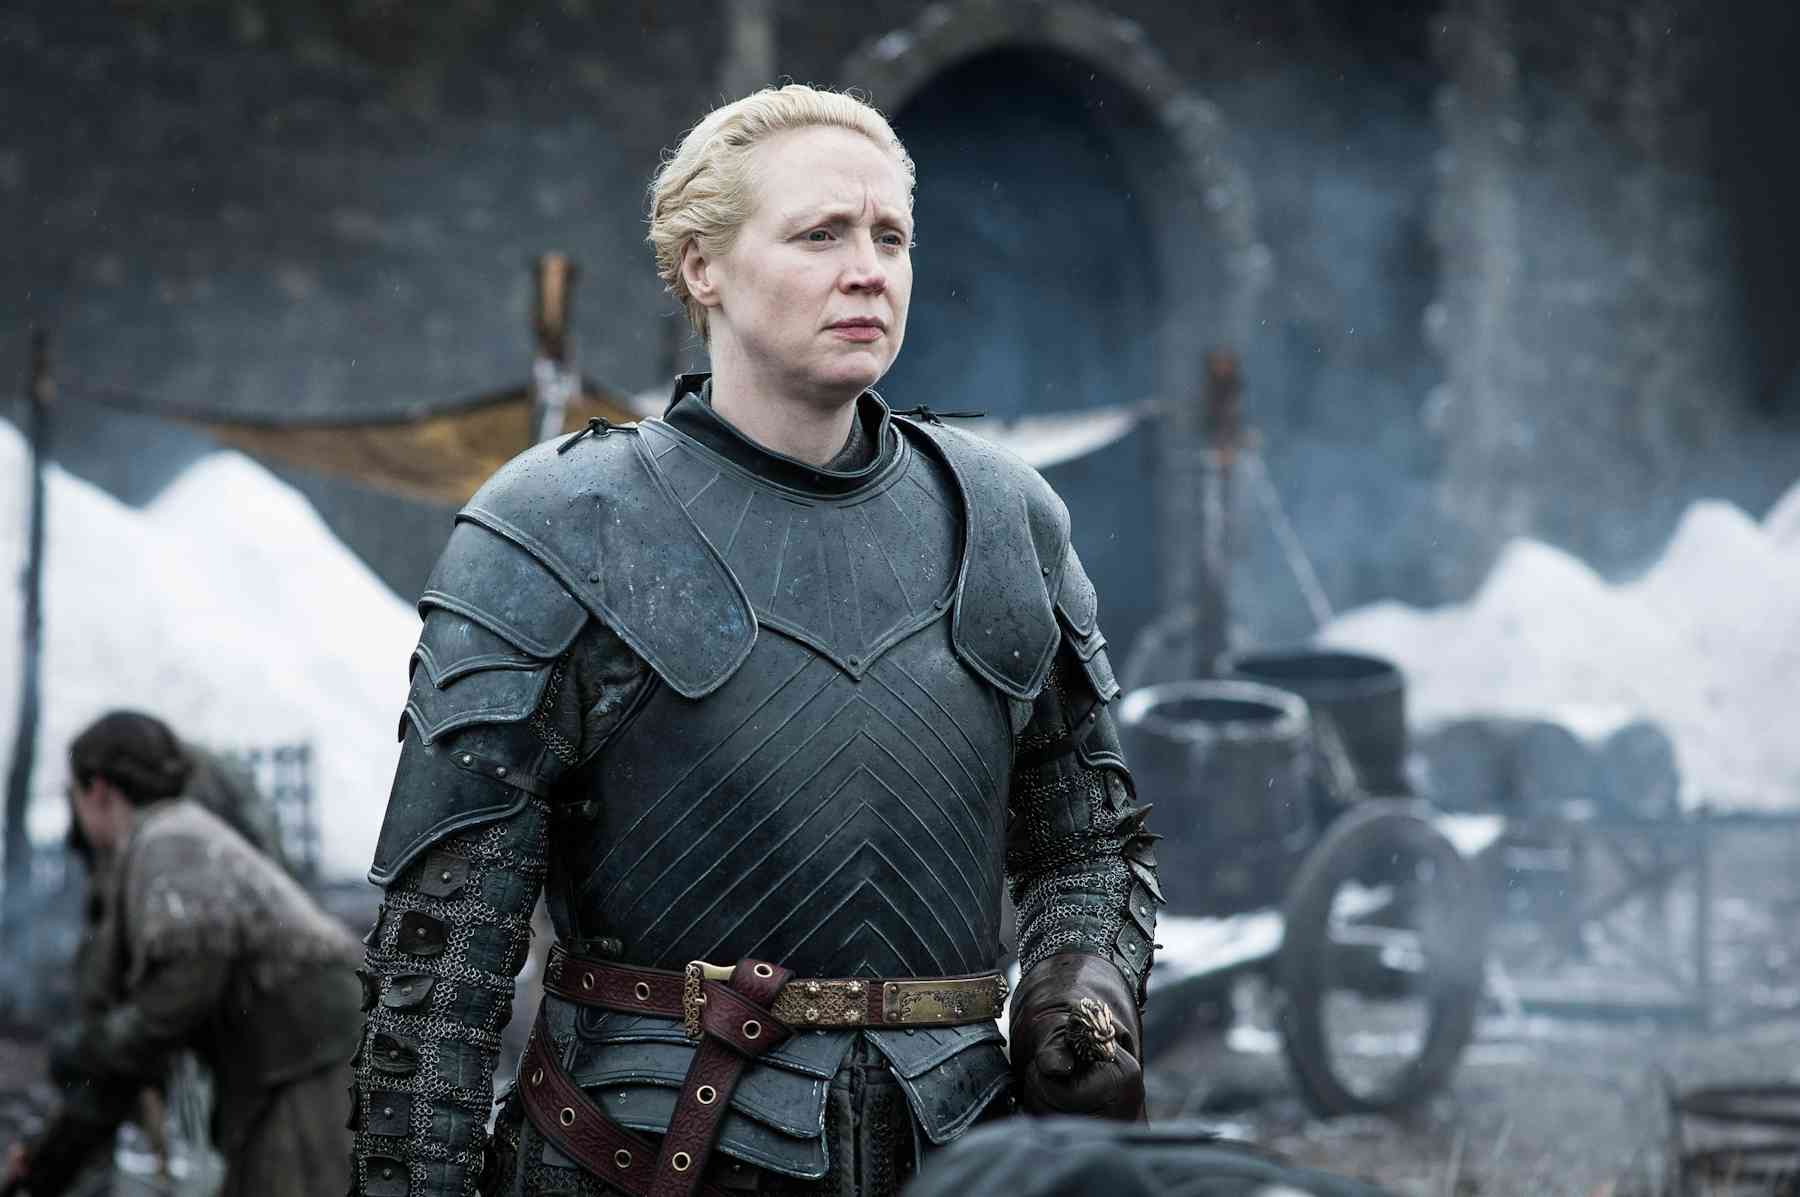 Brienne of Tarth: woman as warrior, defying gender expectations. 